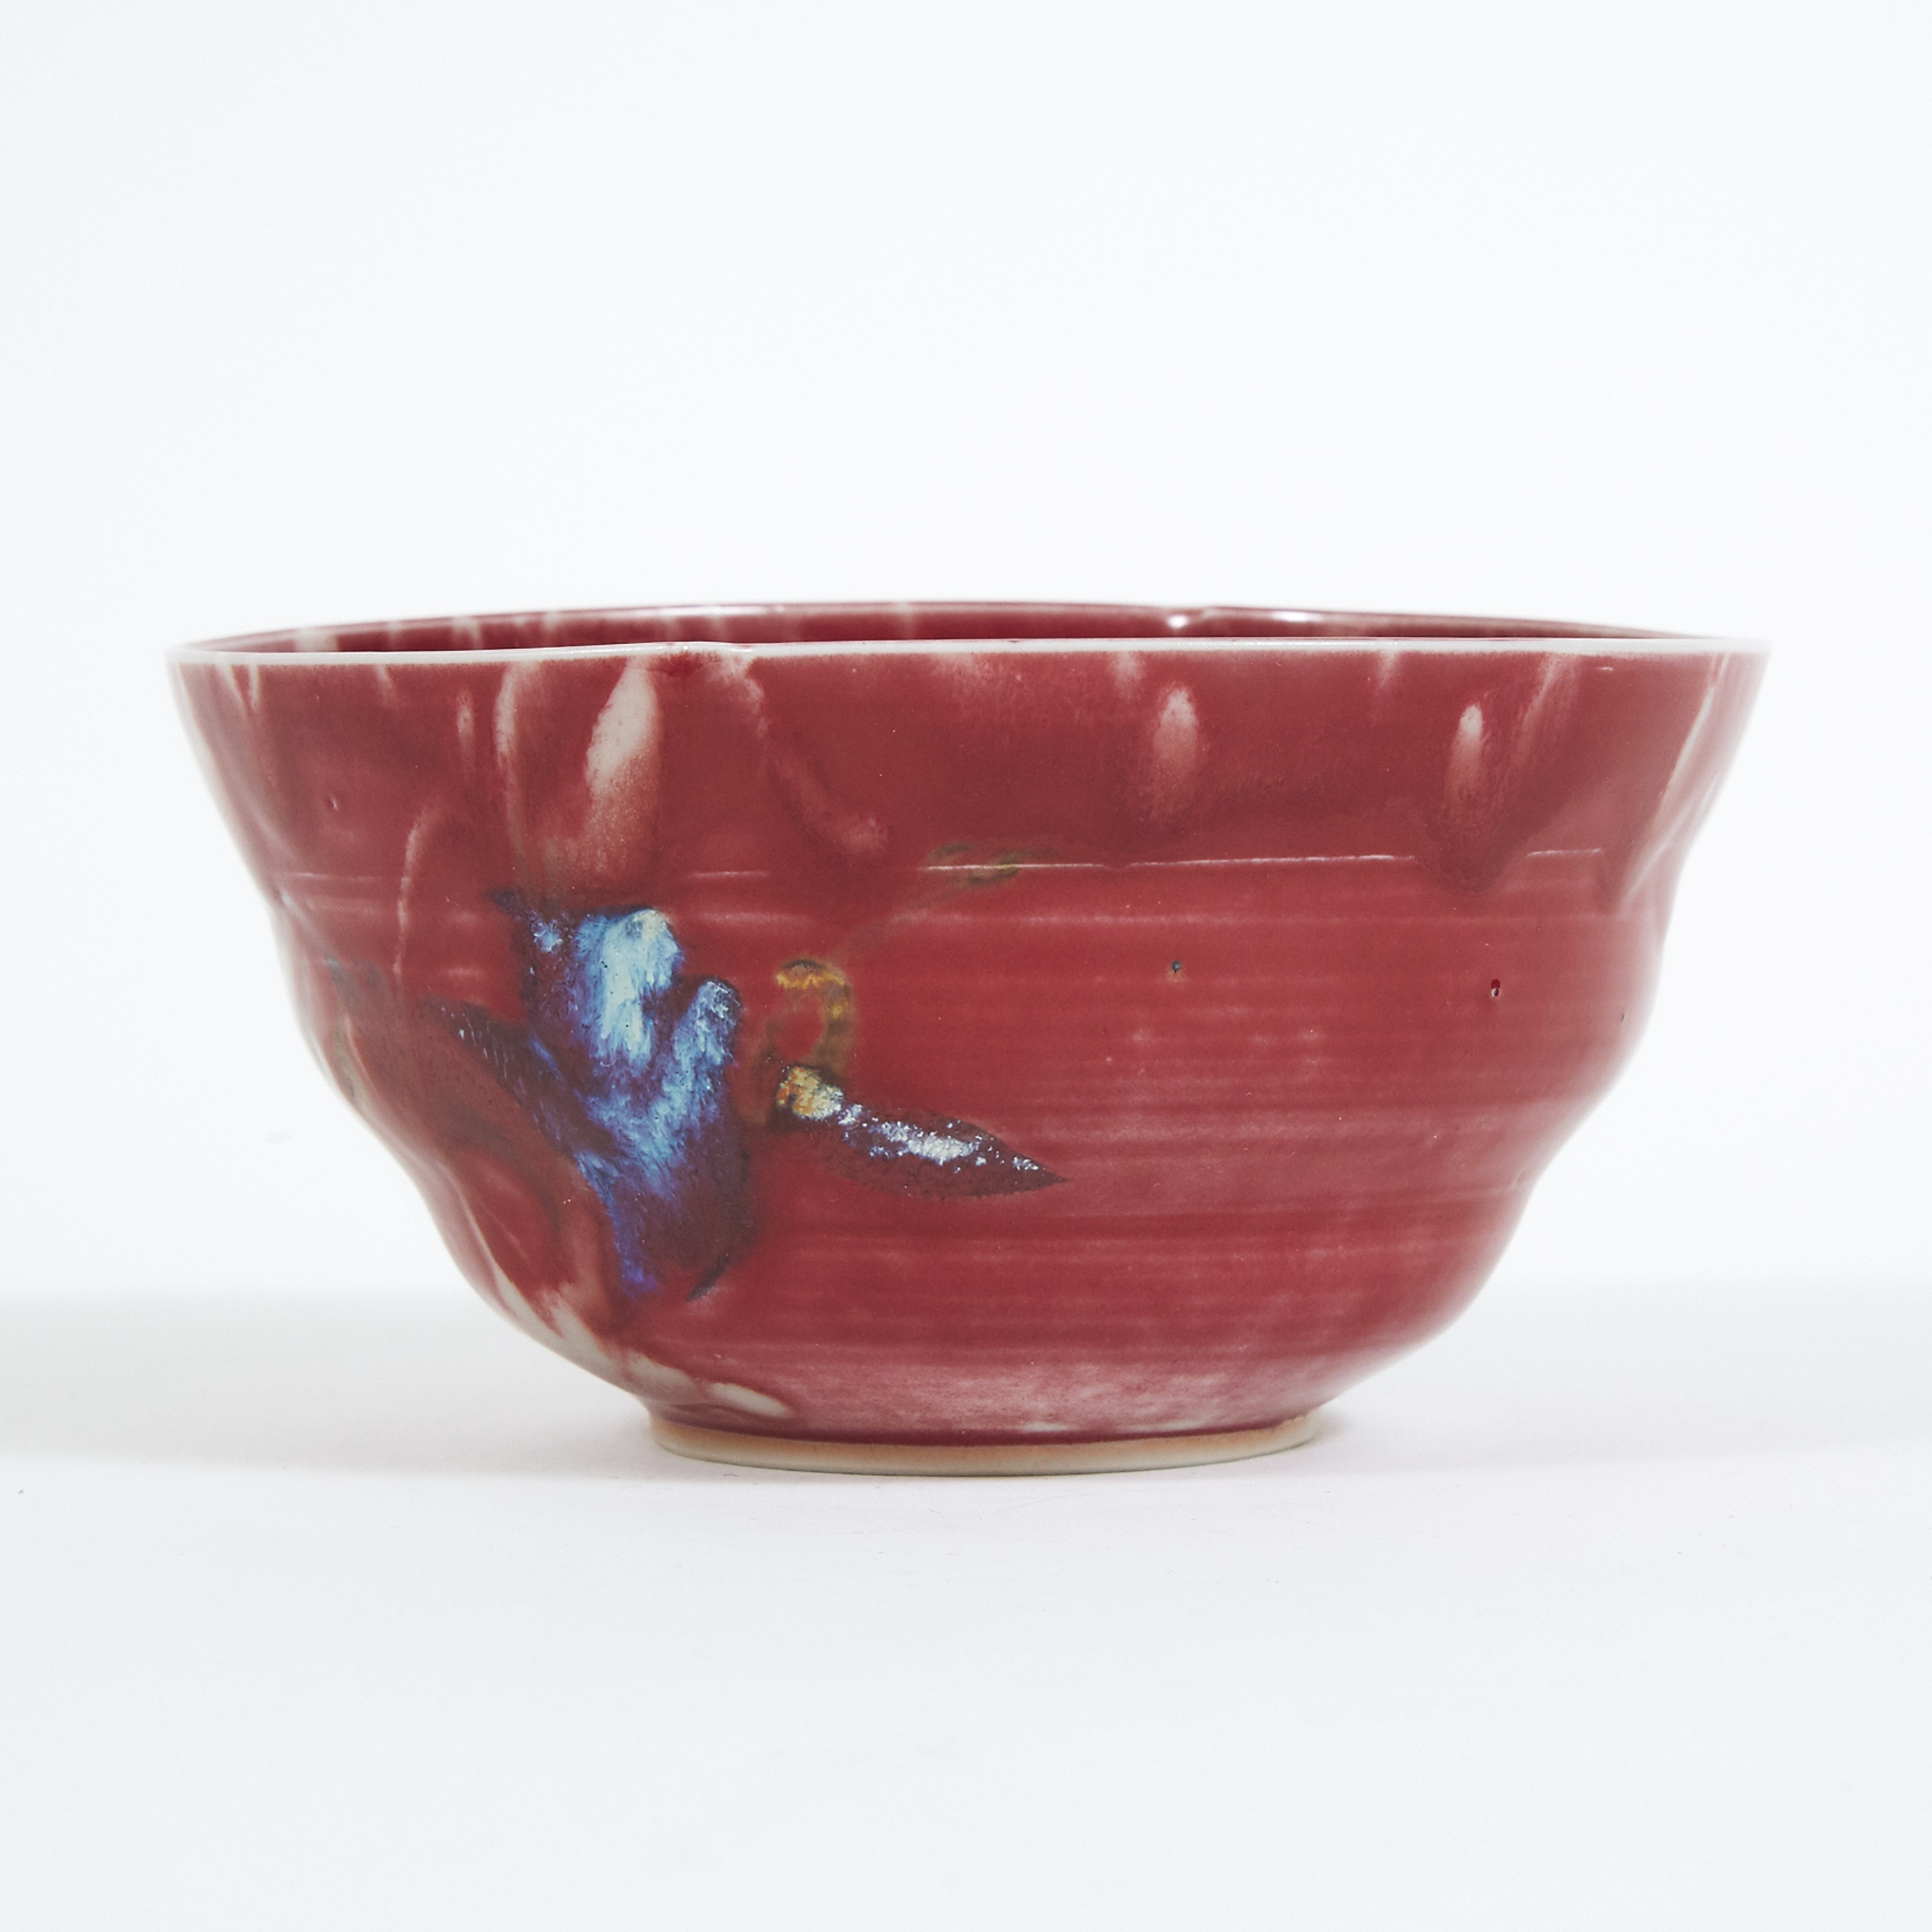 Kayo O'Young (Canadian, b.1950), Small Red Glazed Bowl, 1994